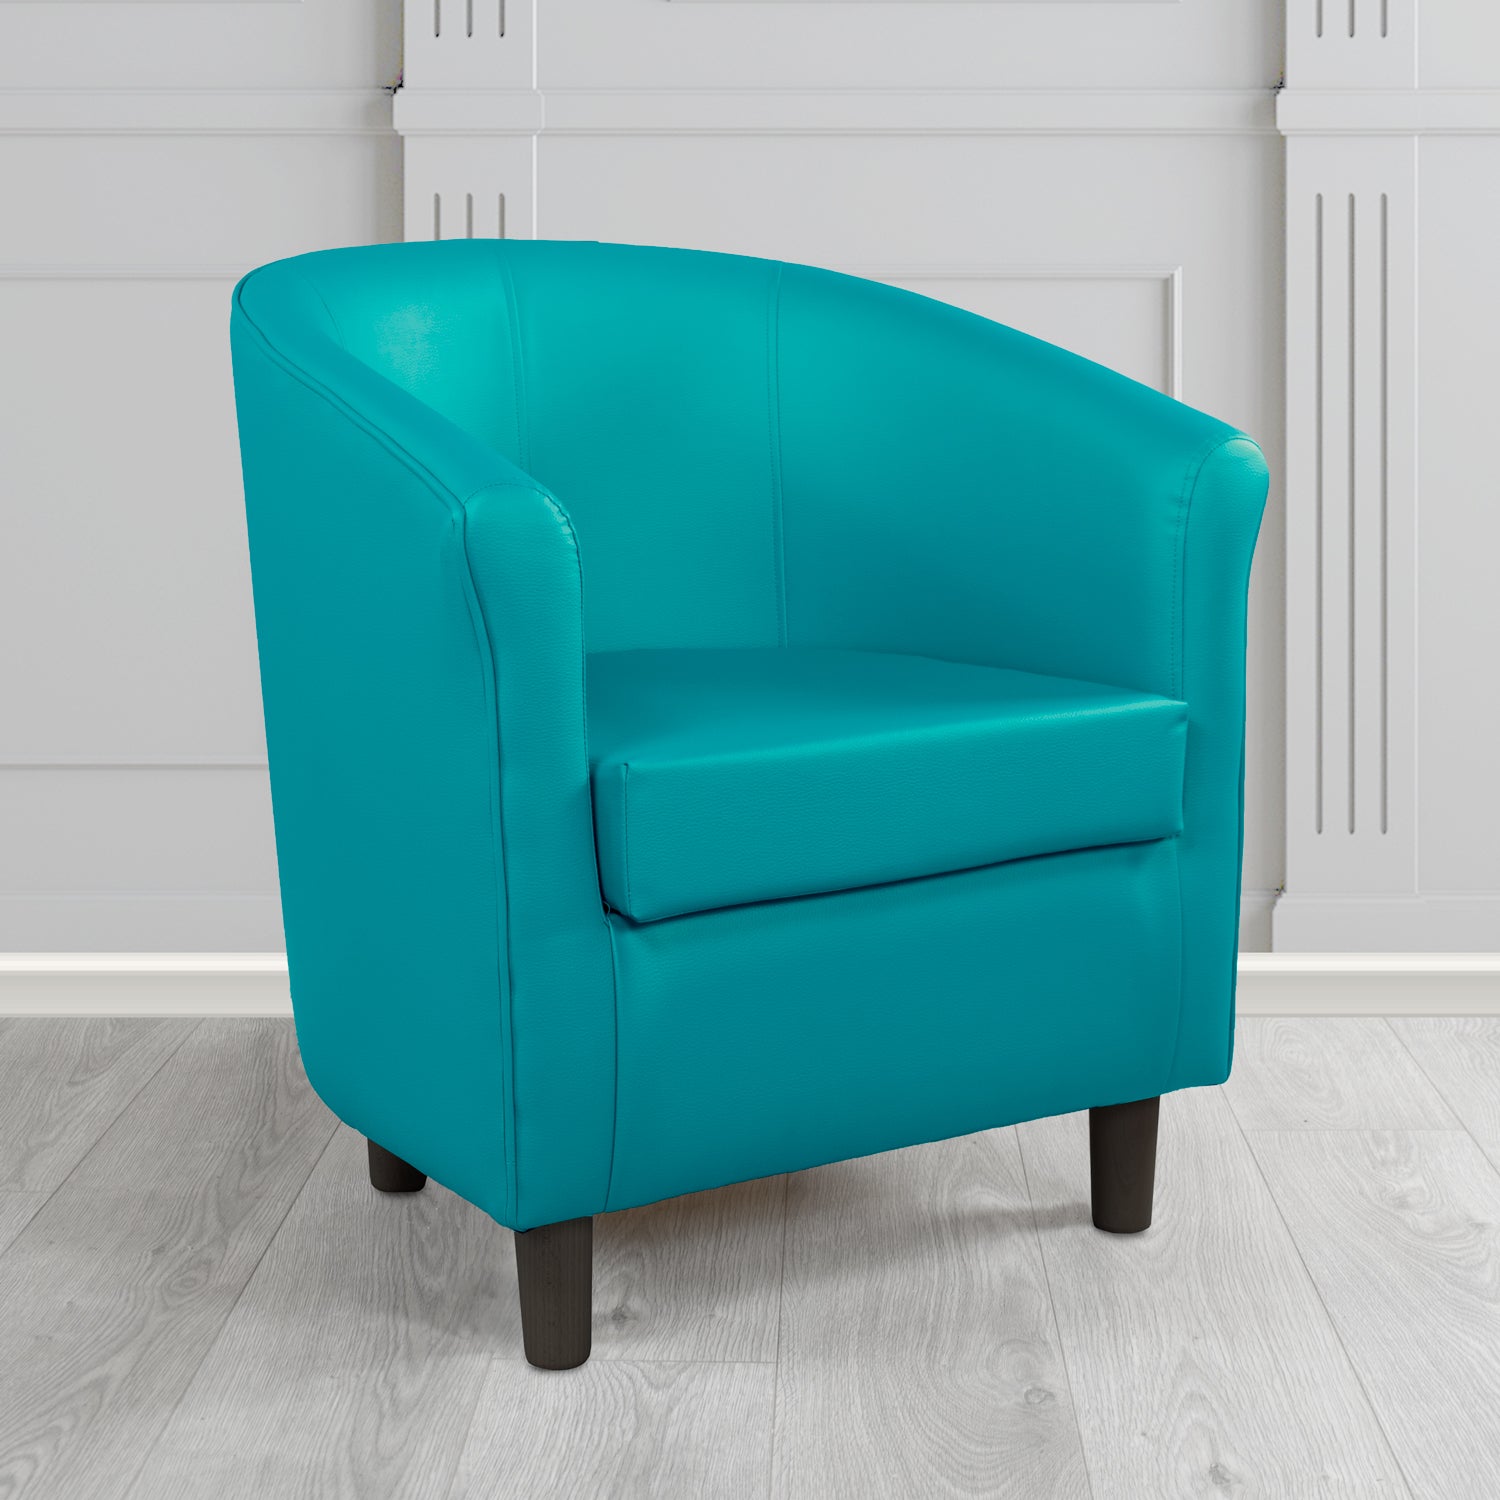 Tuscany Just Colour Calypso Antimicrobial Crib 5 Contract Faux Leather Tub Chair - The Tub Chair Shop